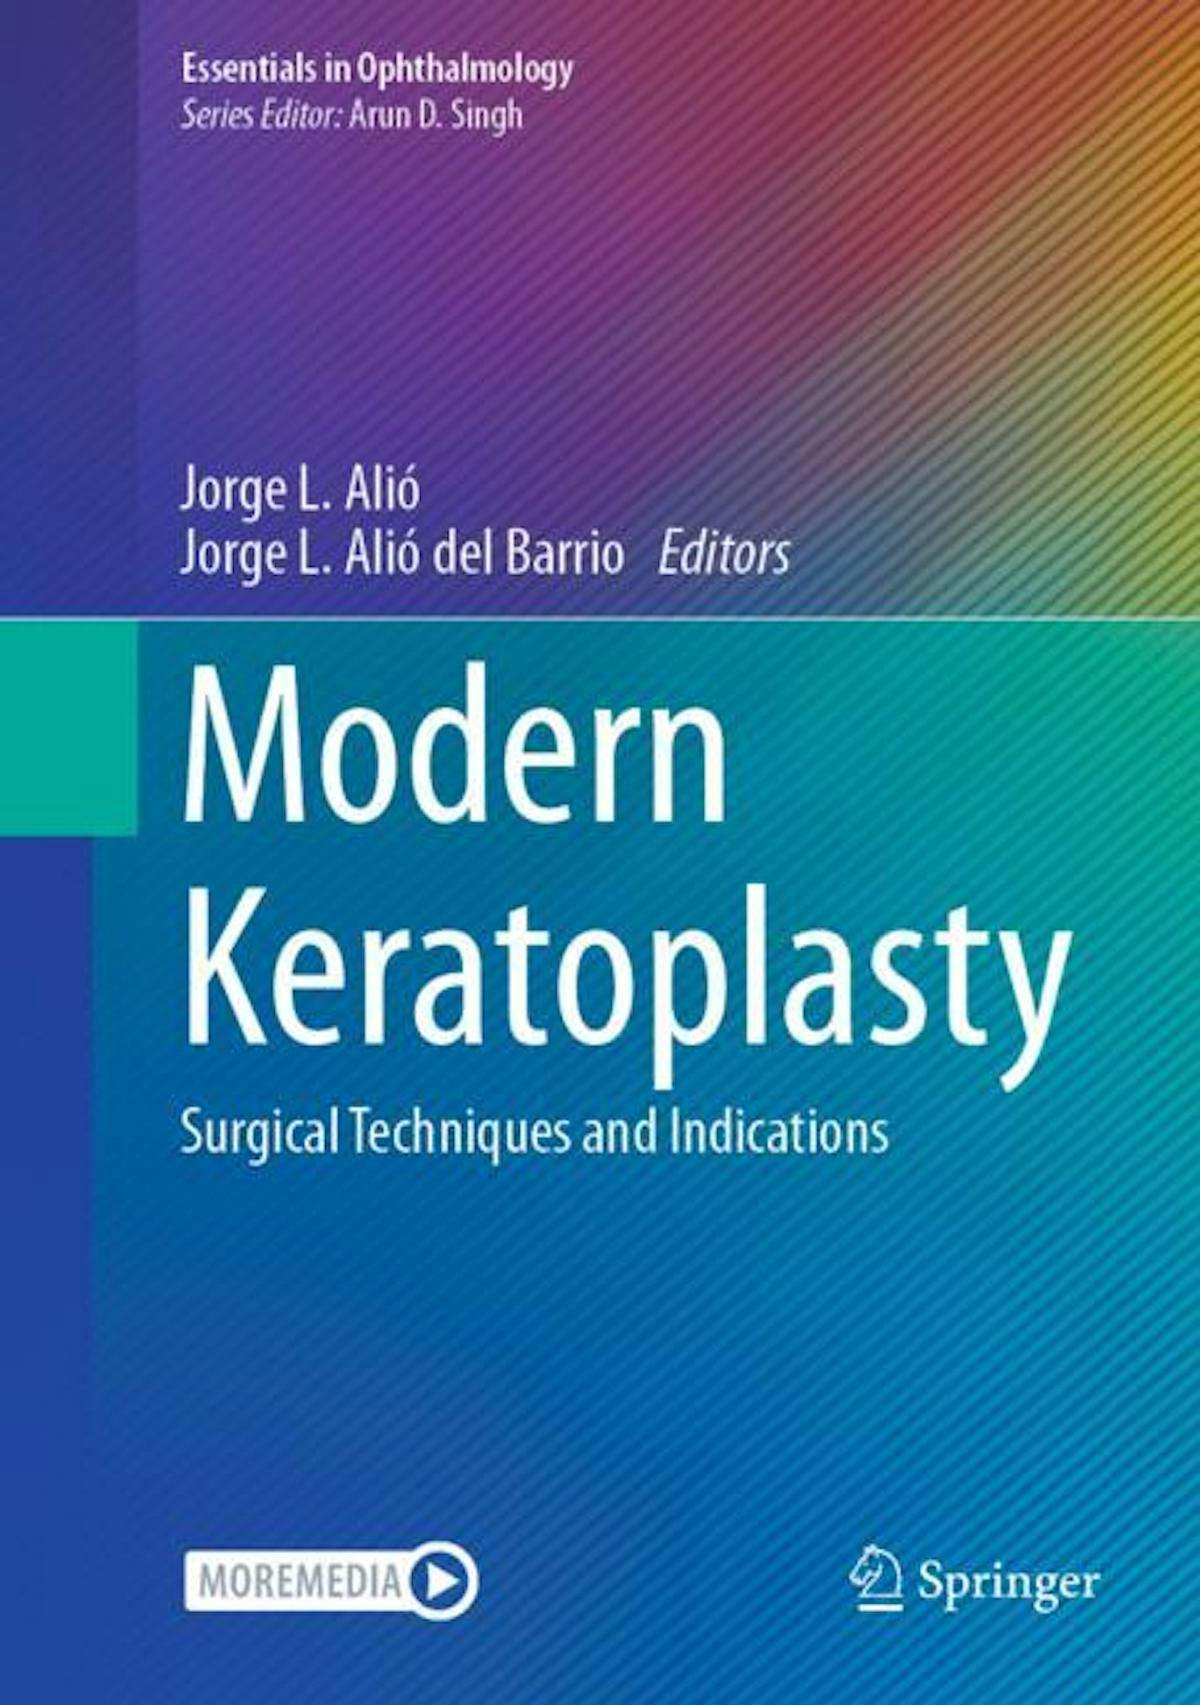 The cover of "Modern Keratoplasty: Surgical Techniques and Indications." Image used with permission from Springer Nature.